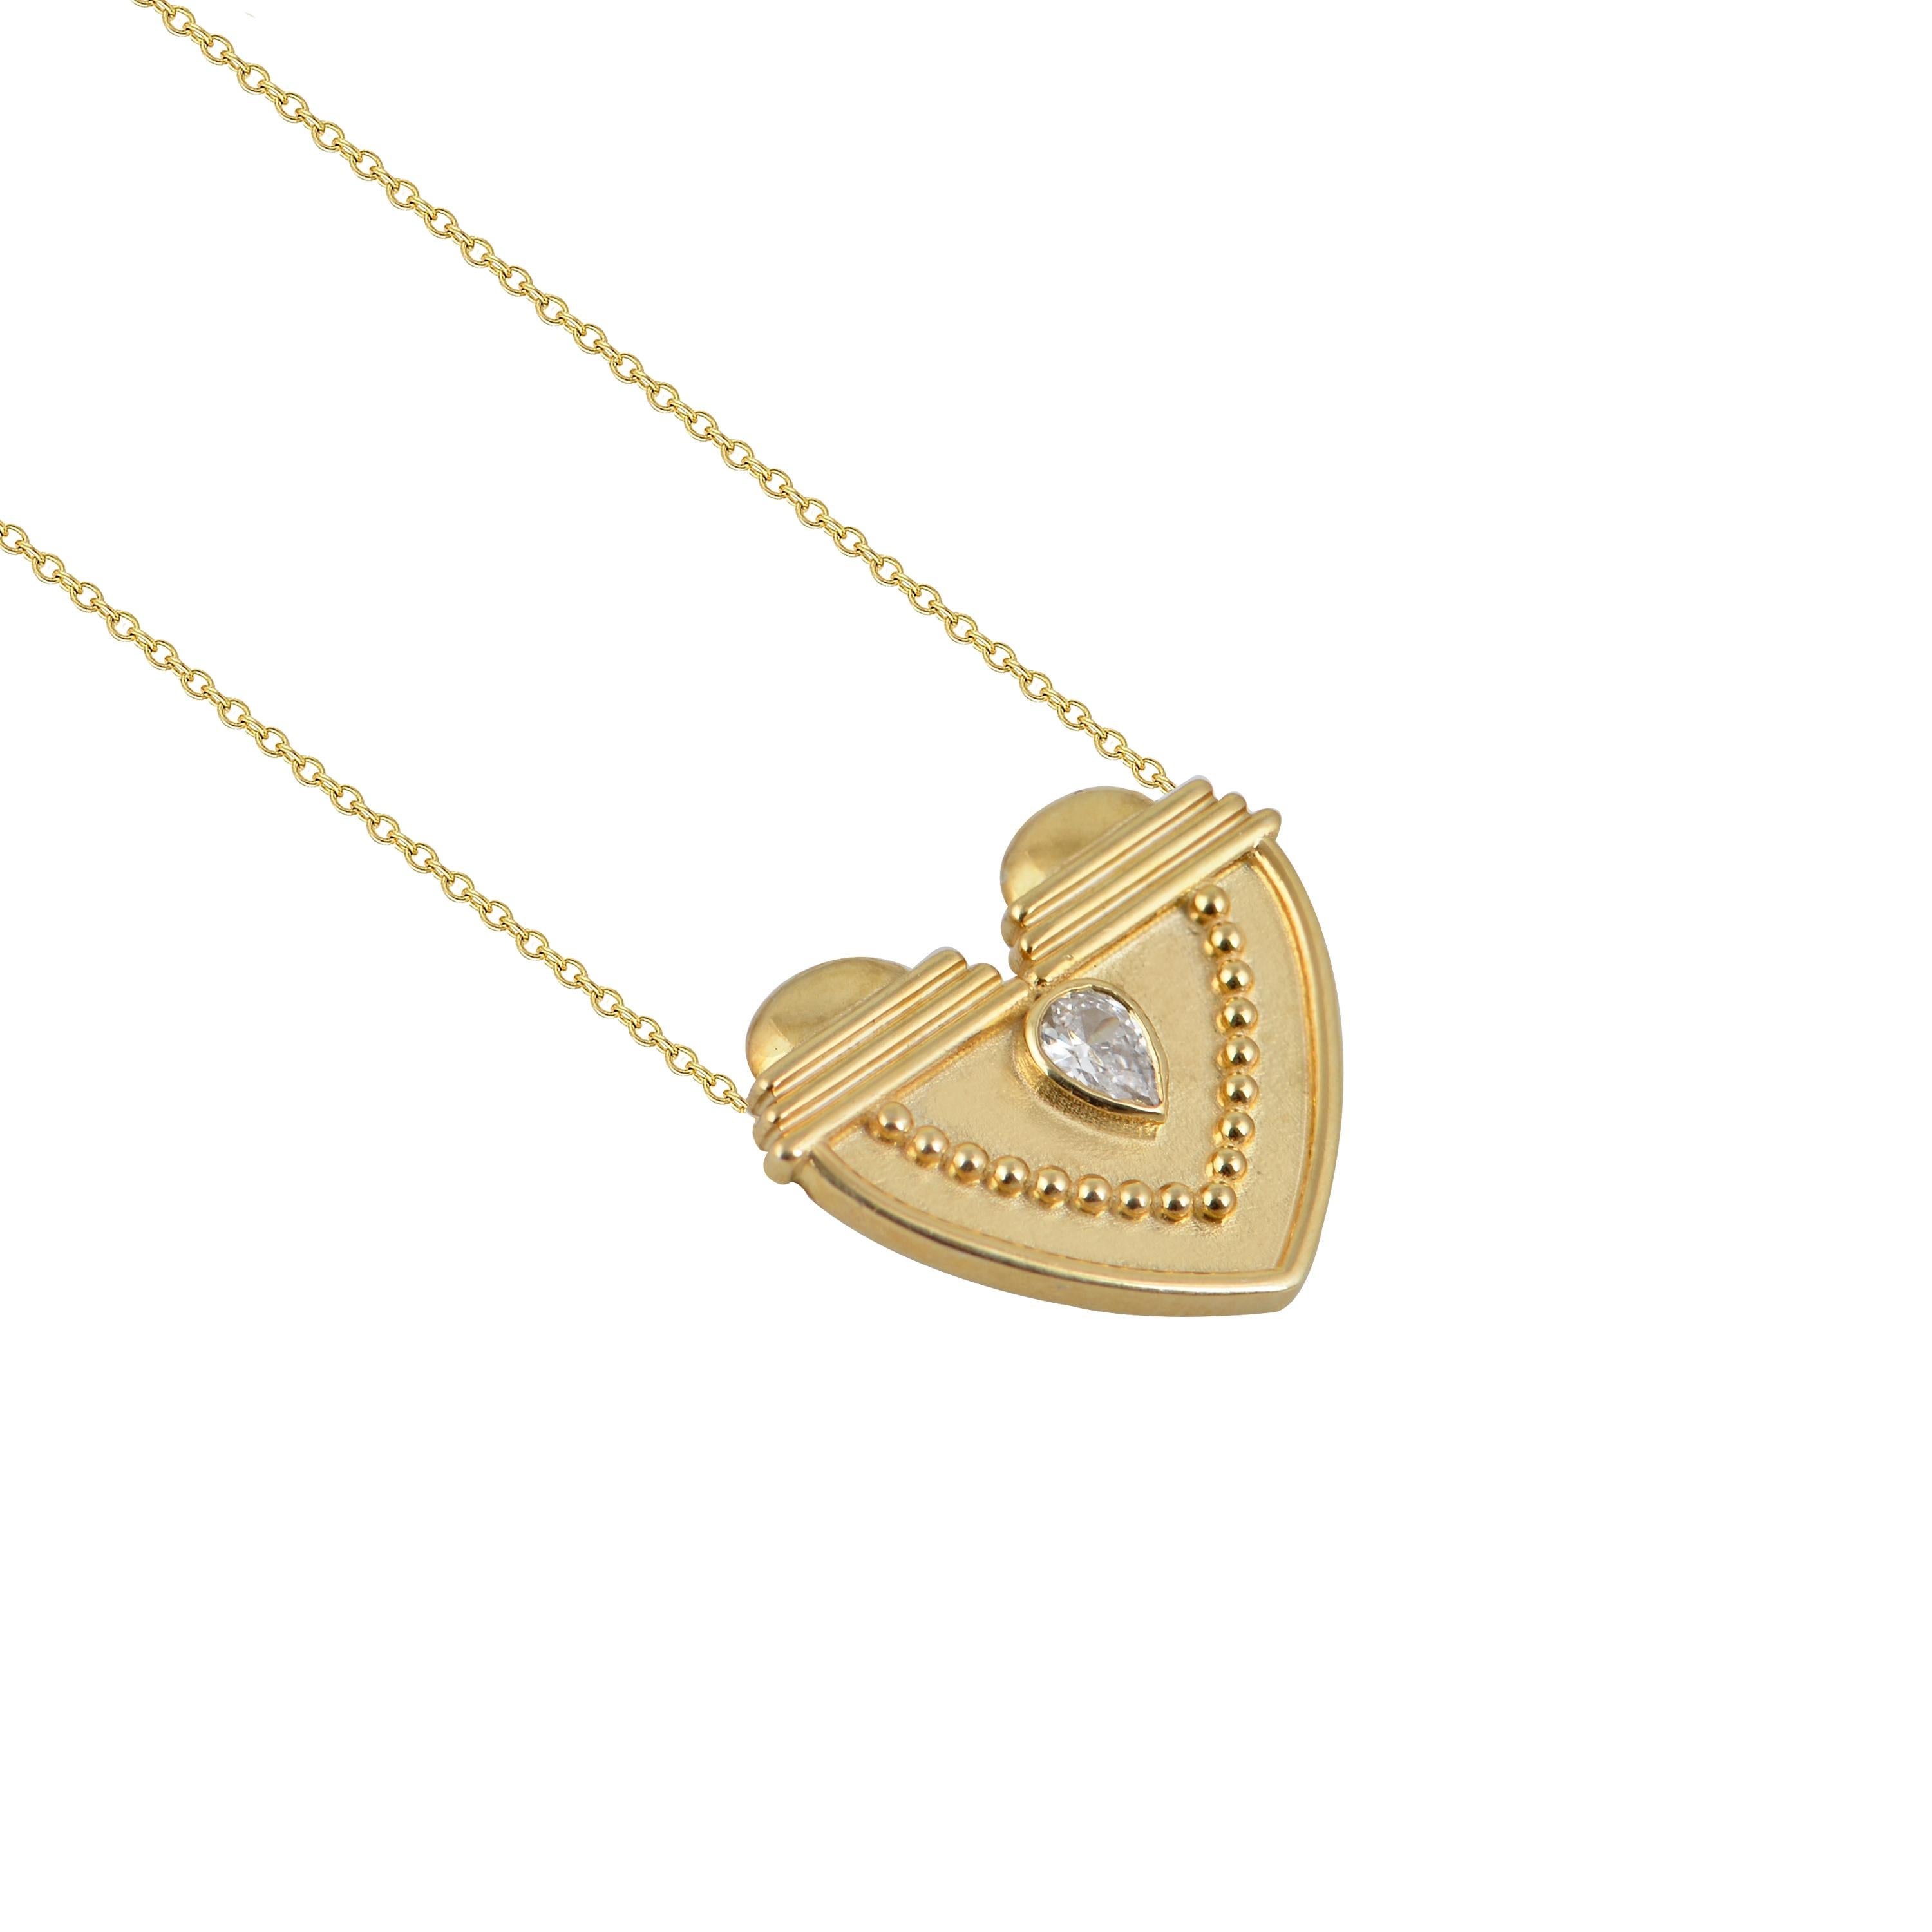 Designer: Alexia Gryllaki

Dimensions: motif L15x18mm, chain 400mm
Weight: approximately 5.3g 
Barcode: NEX4017


Textured heart pendant in 18 karat yellow gold with a 400mm chain set with a pear-shaped diamond approx. 0.20cts.

Shipping time might